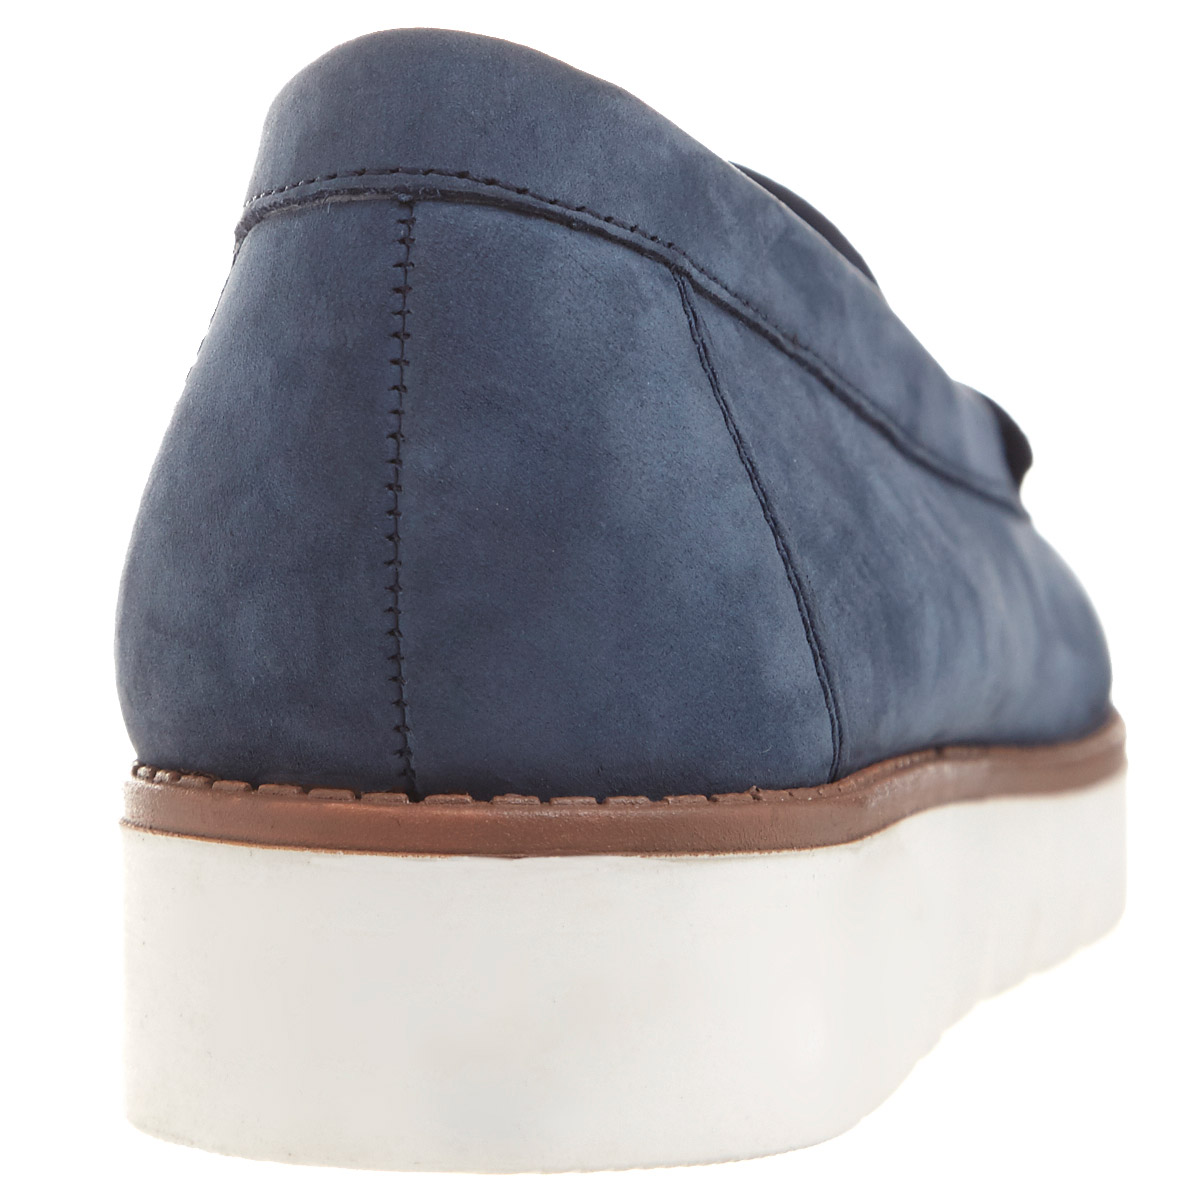 Dunnes Stores  Denim Comfort Bliss Leather Moccasins